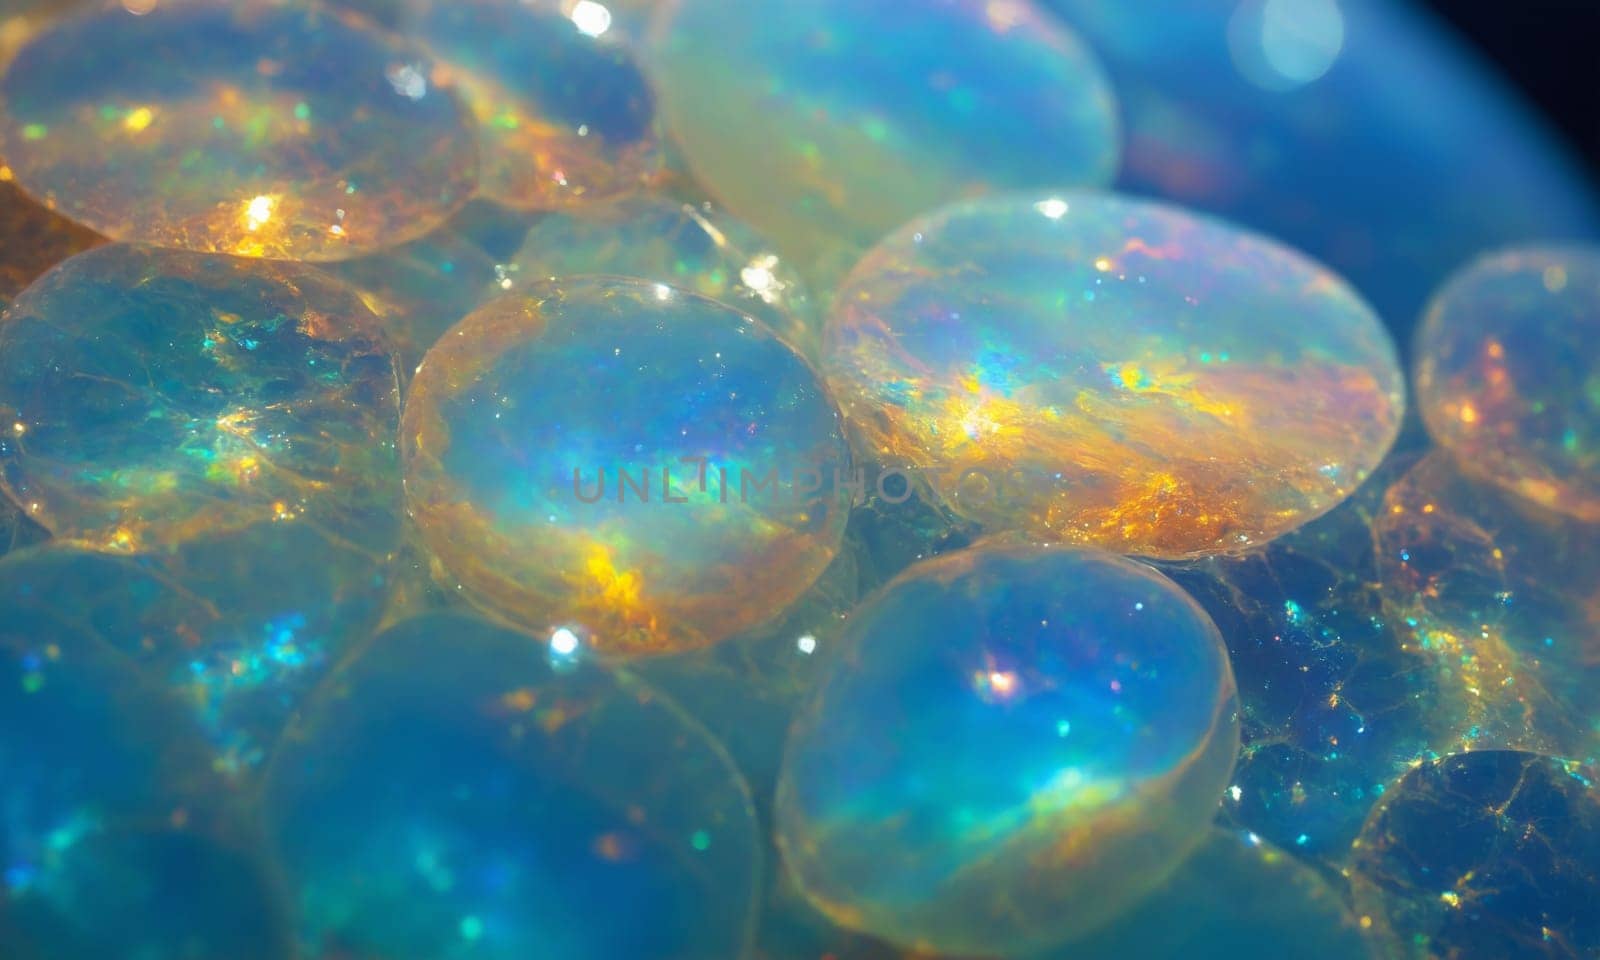 Opal texture for background or design piece of art. by Andre1ns